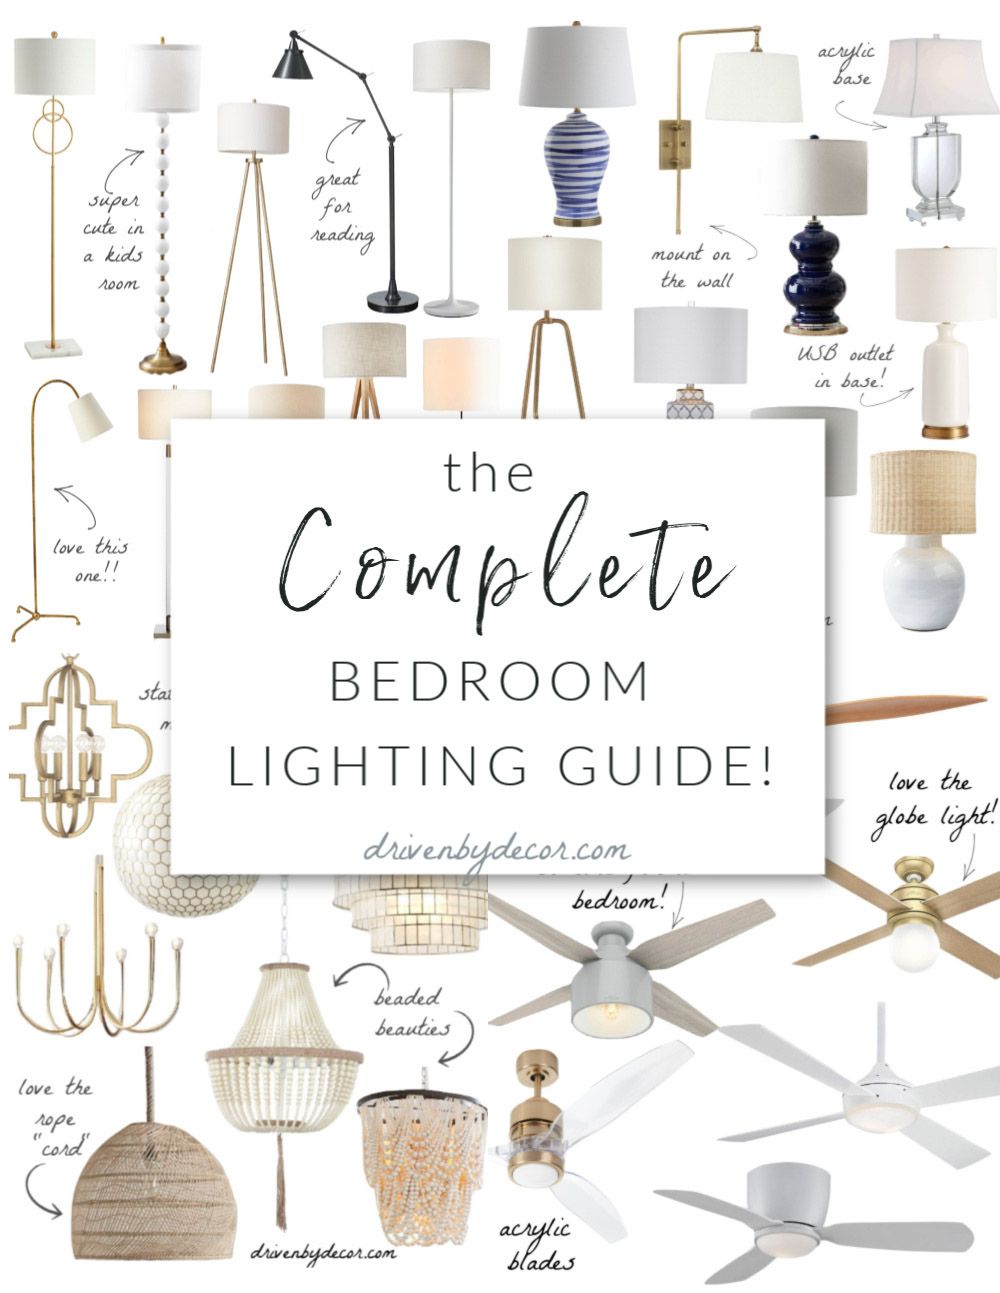 Guide to chandeliers in the bedroom